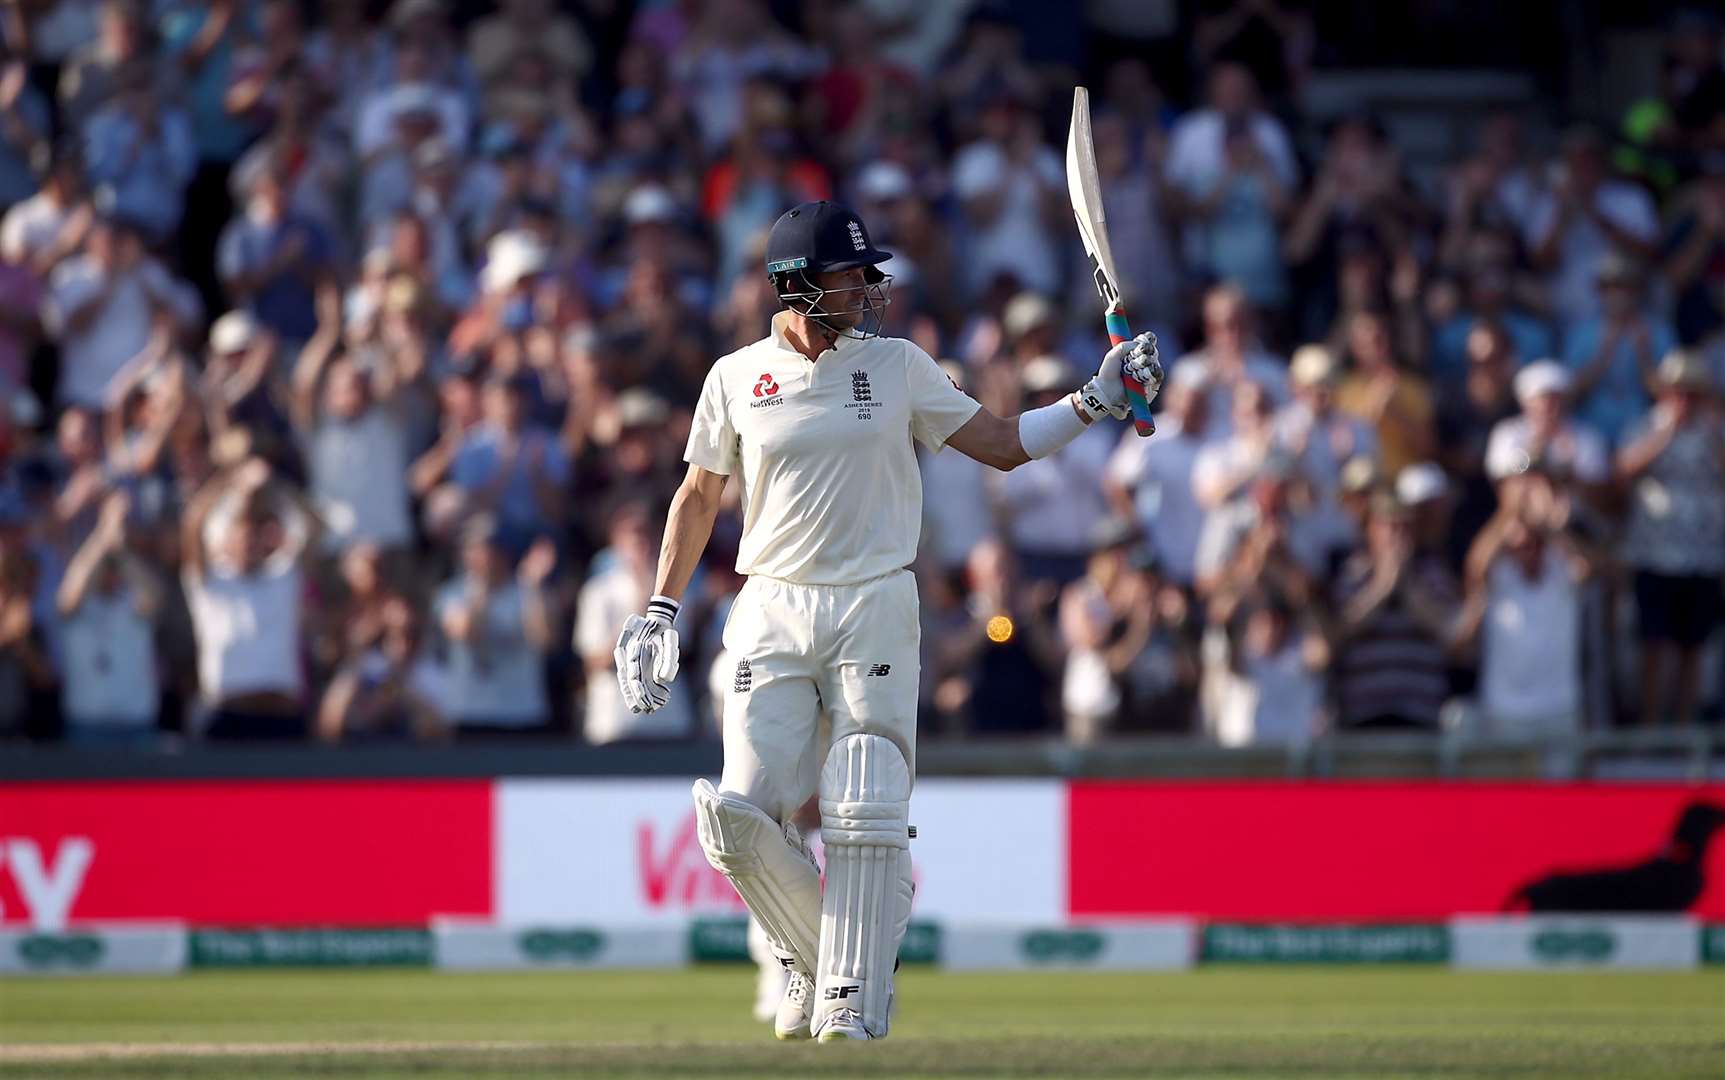 England's Joe Denly acknowledges the crowd after reaching a half century during day three of the third Ashes Test match at Headingley, Leeds. Picture: PA Images